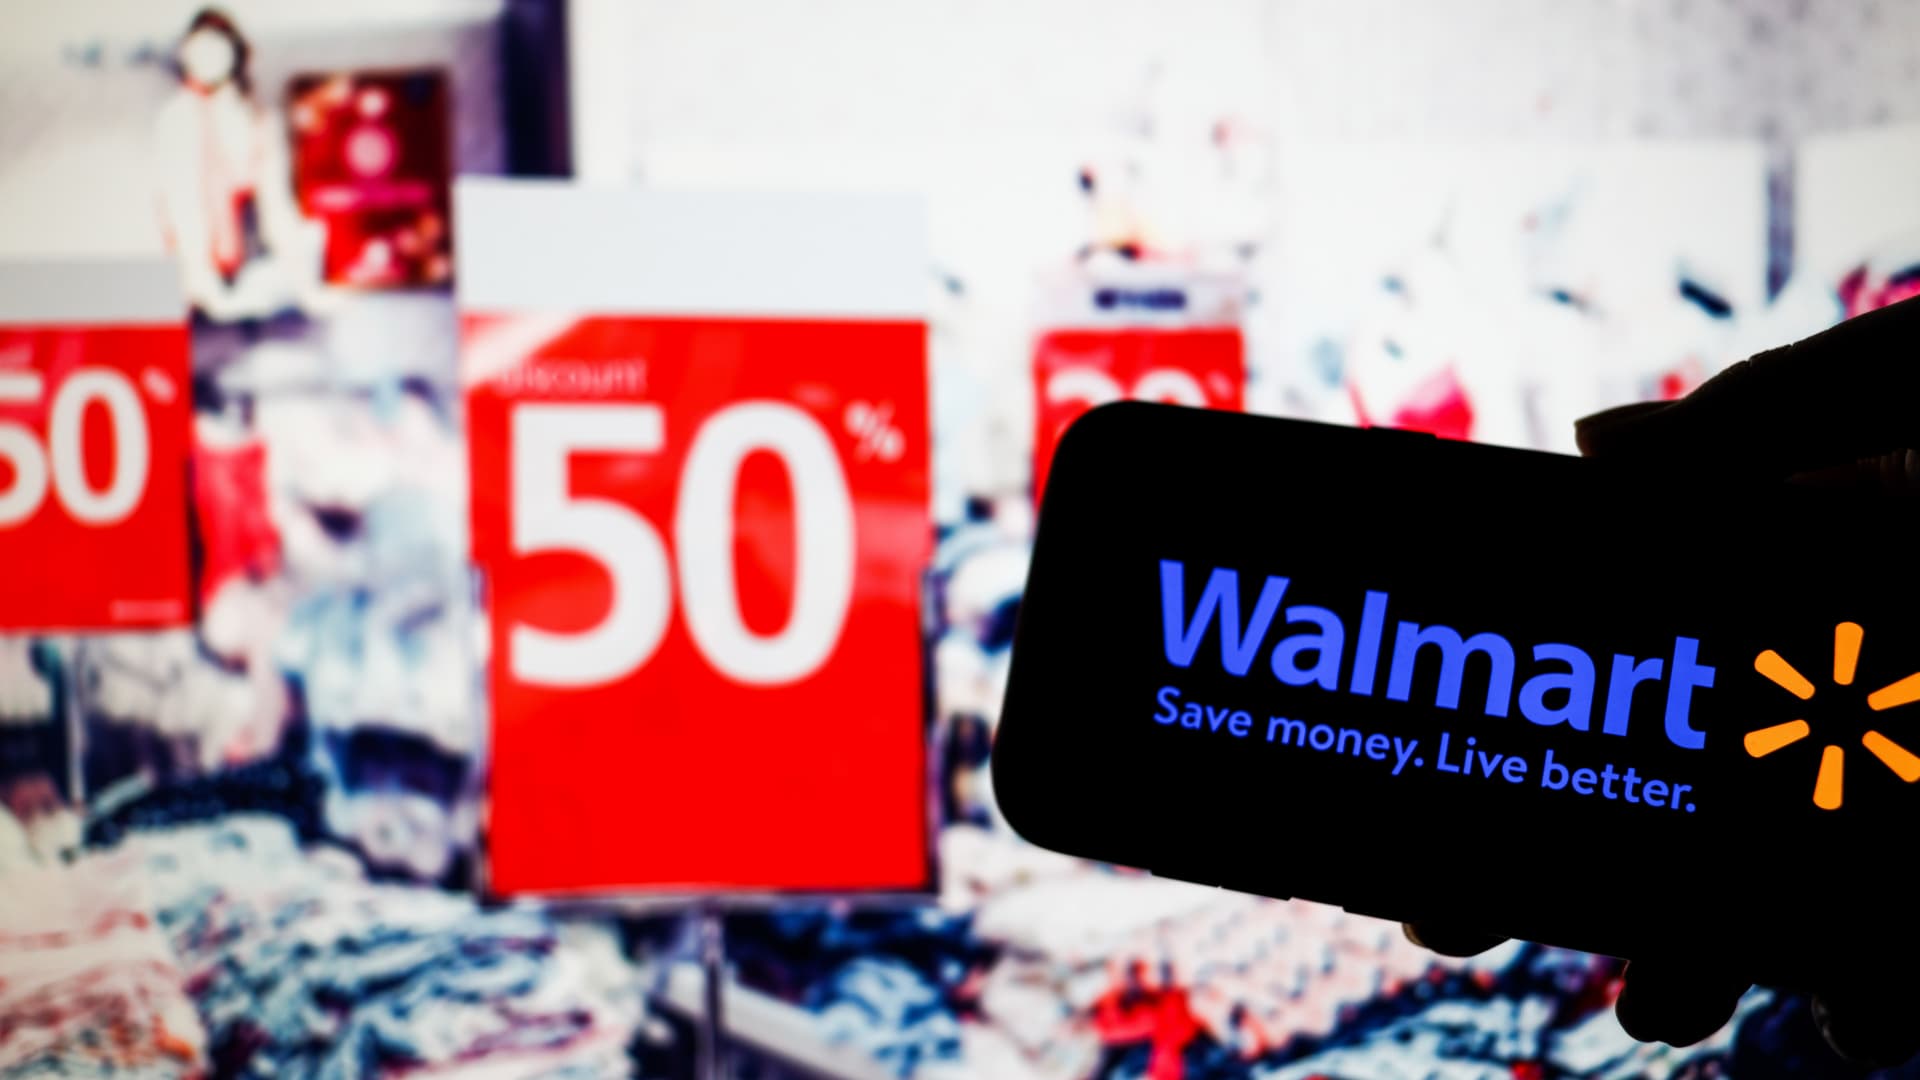 The Walmart, Goal stock misses embody a message for Essential Road